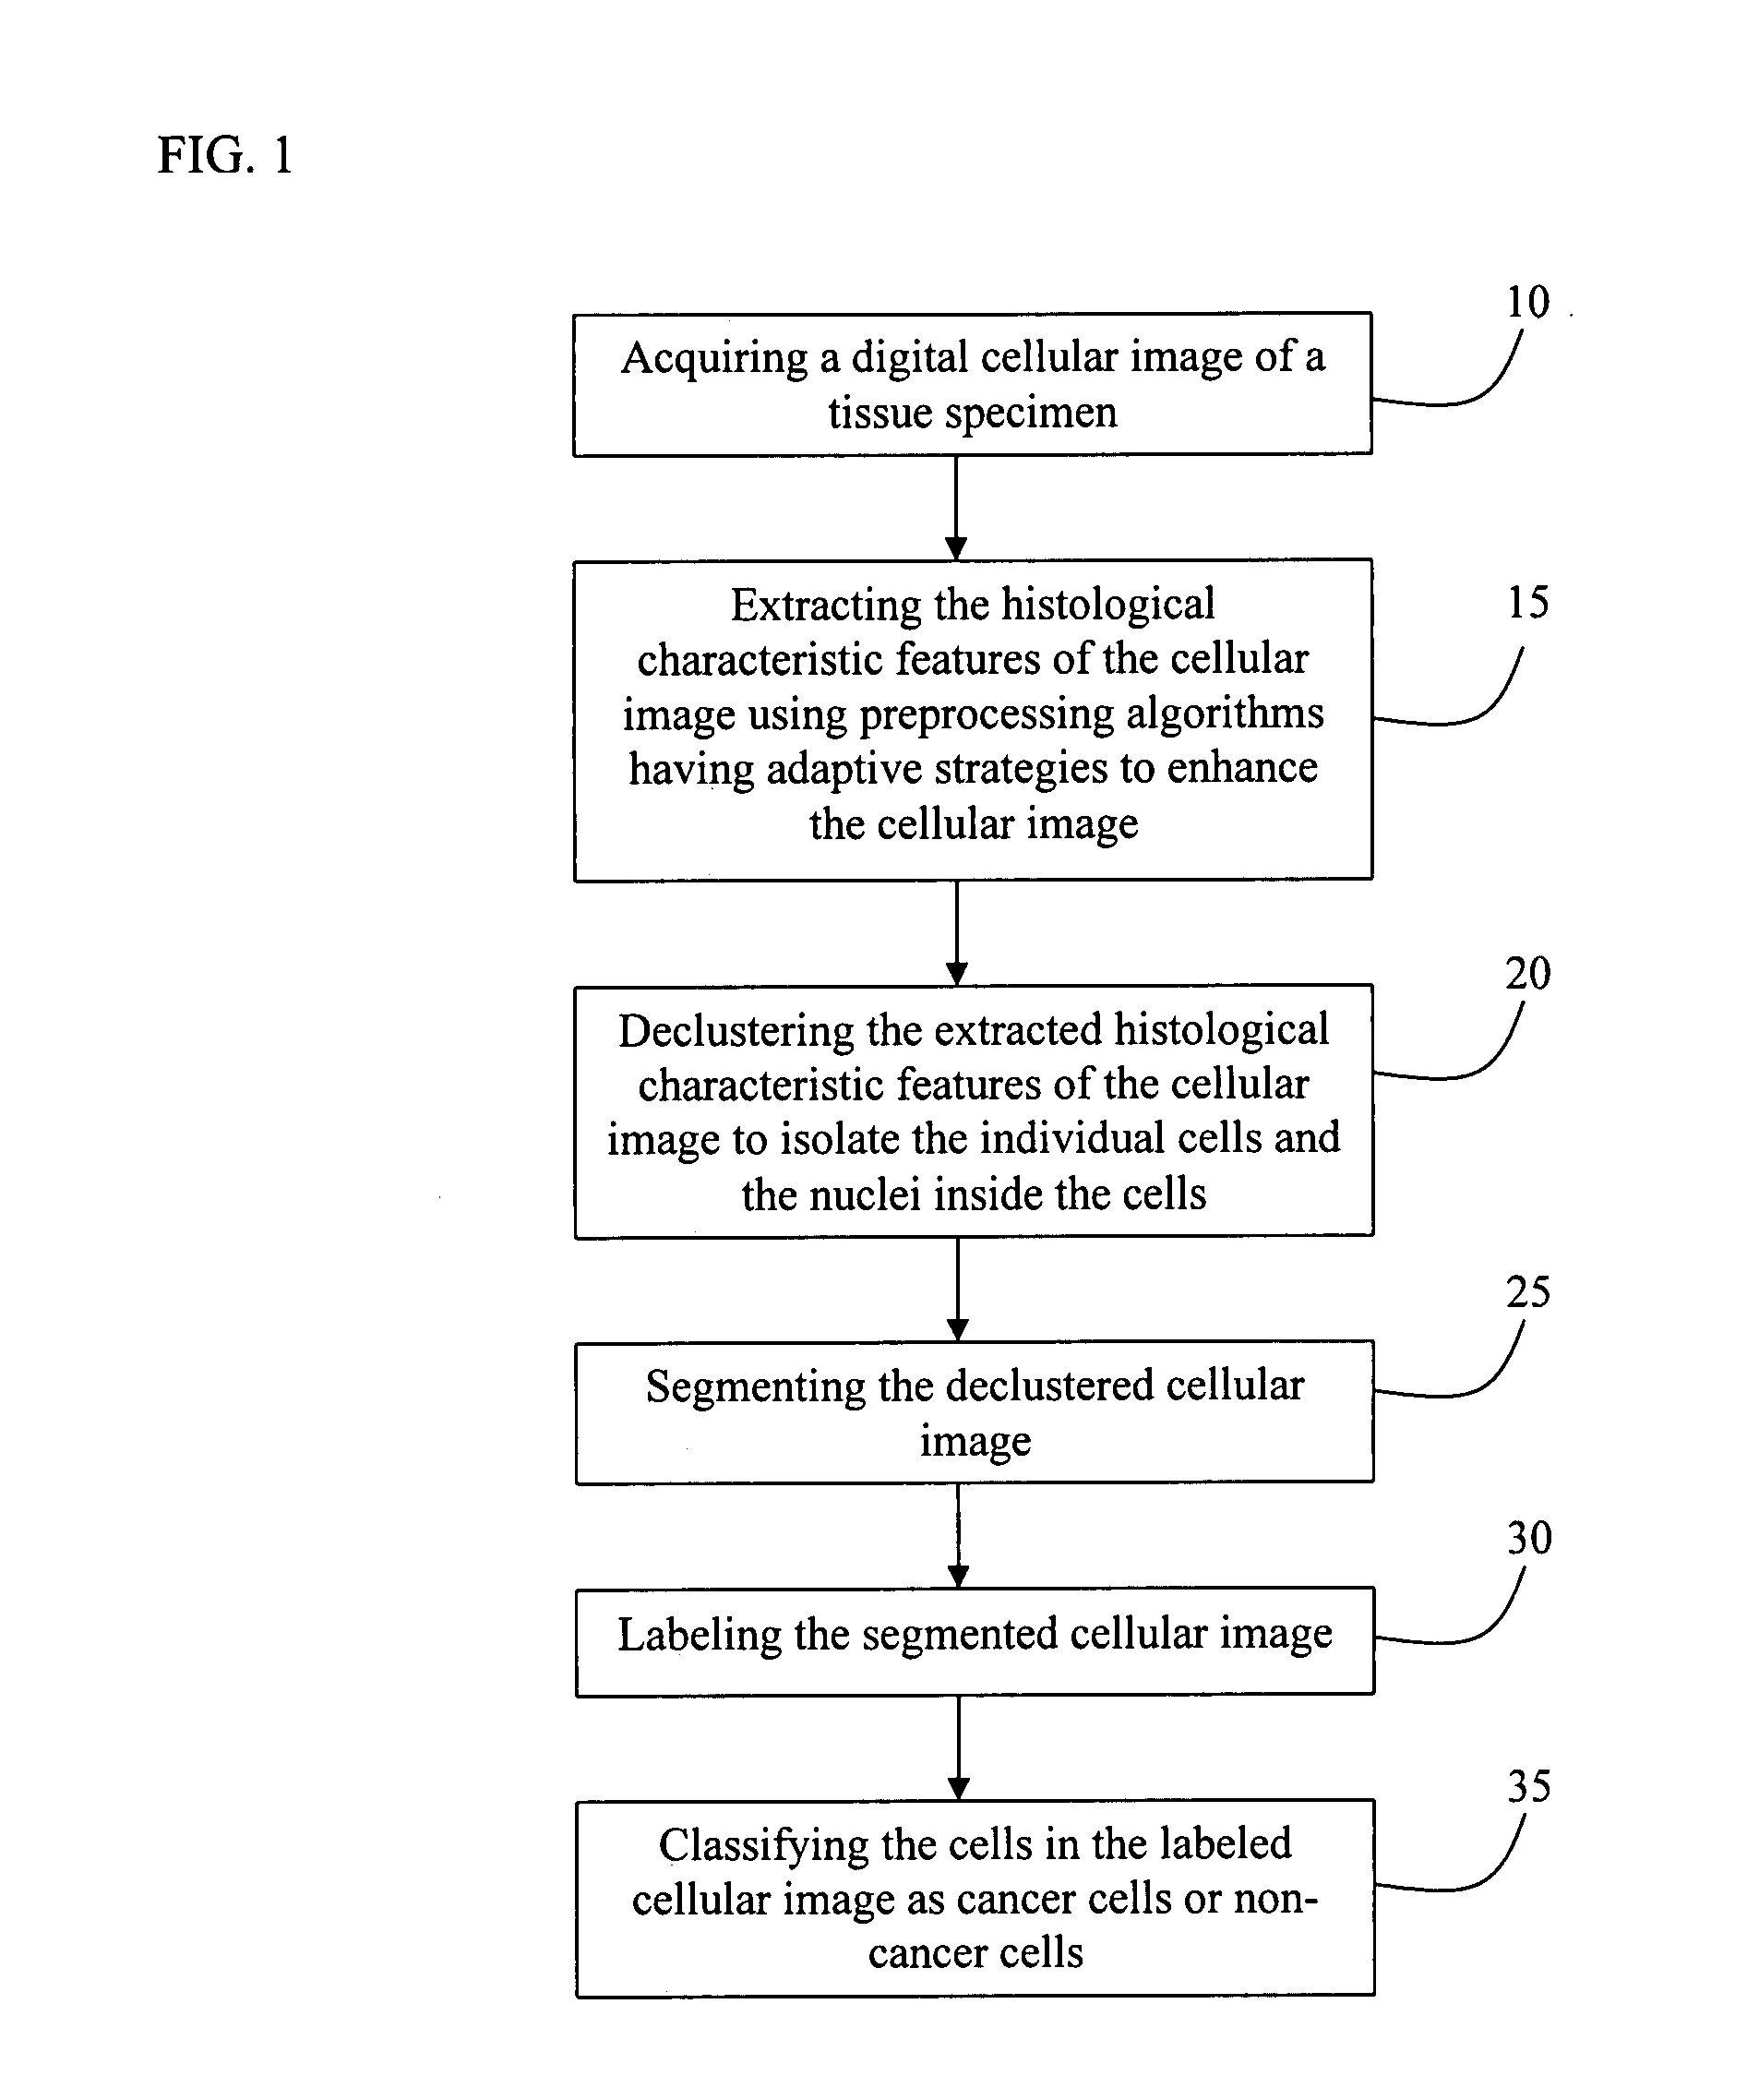 Computer-Aided Pathological Diagnosis System